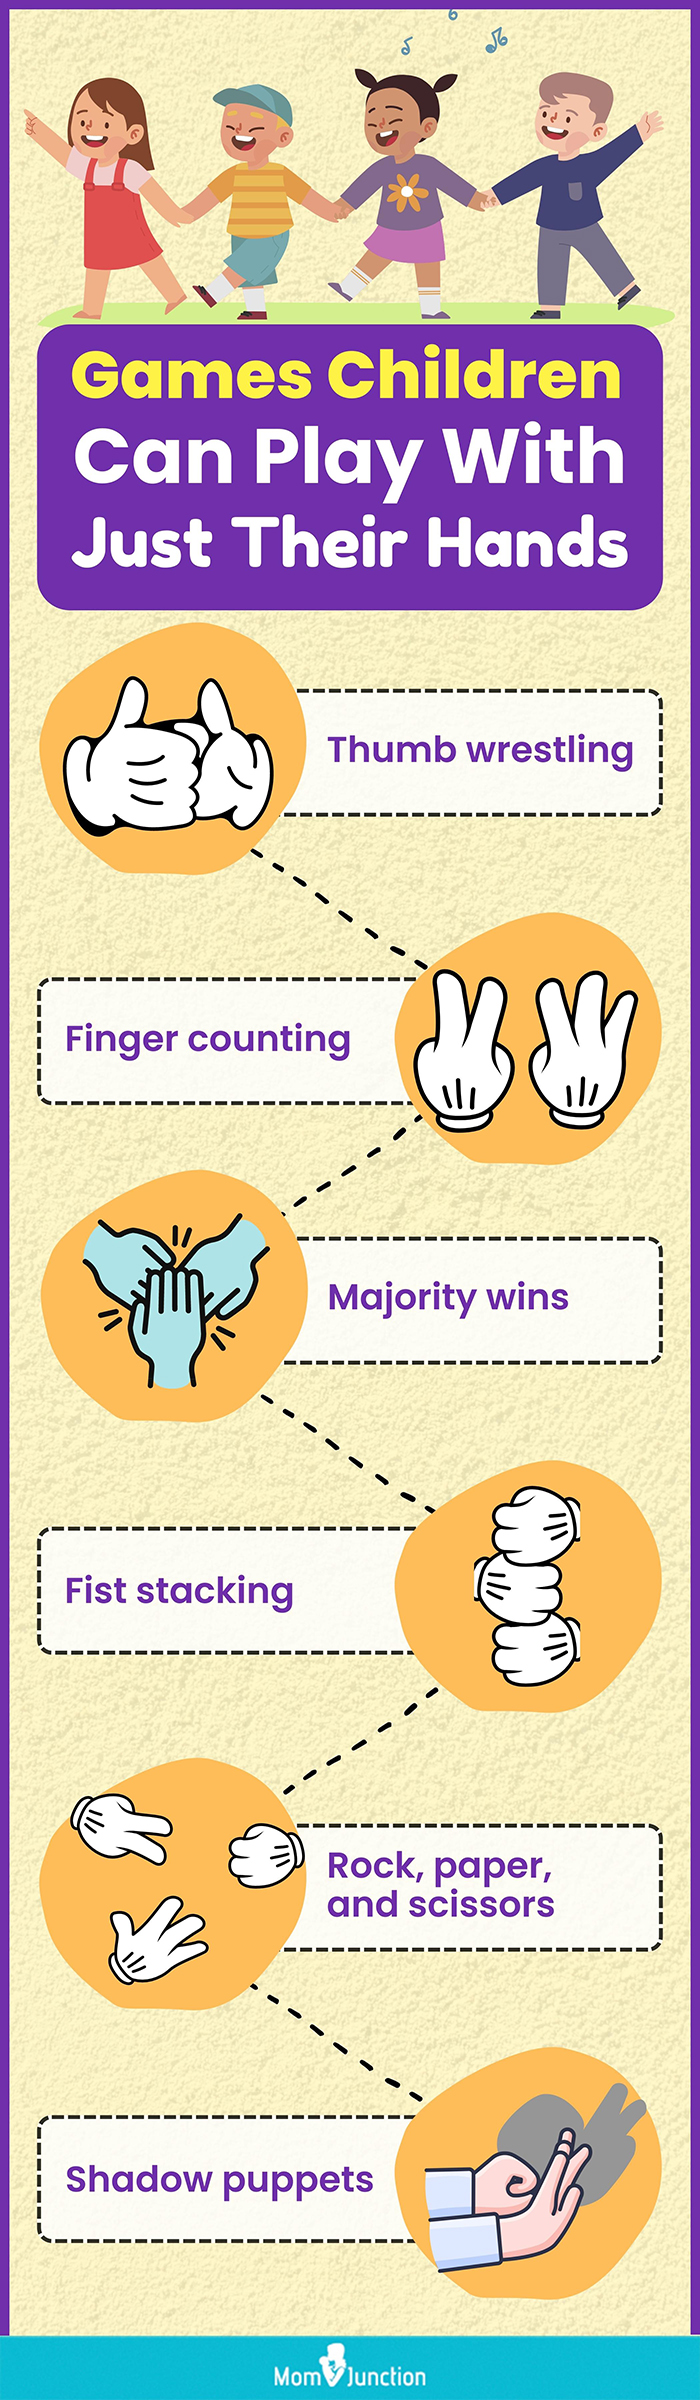 games children can play with just their hands (infographic)